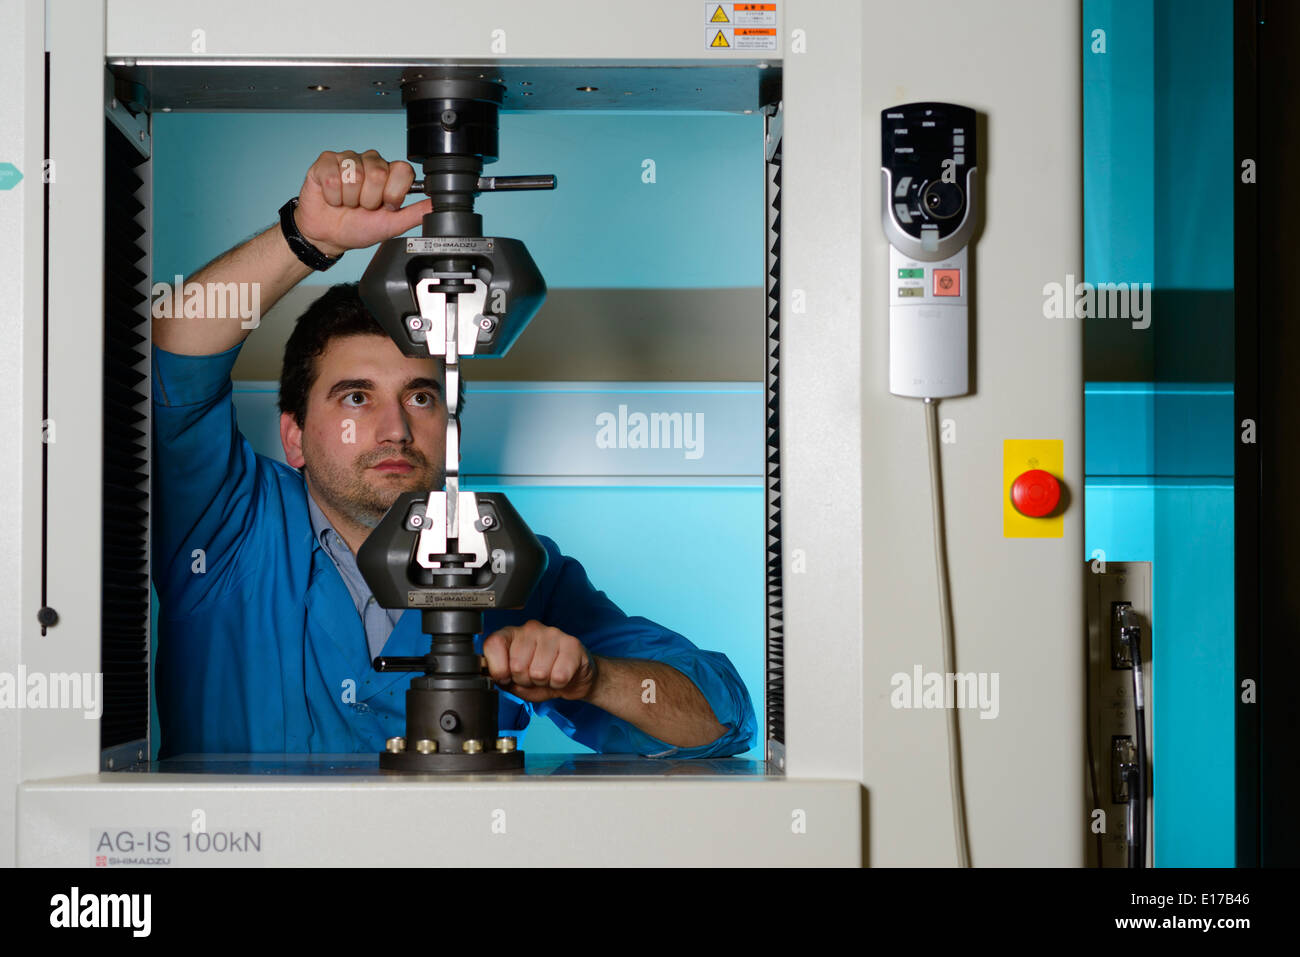 Person using a Shimadzu Autograph AG-IS 100kN universal testing instrument Stock Photo